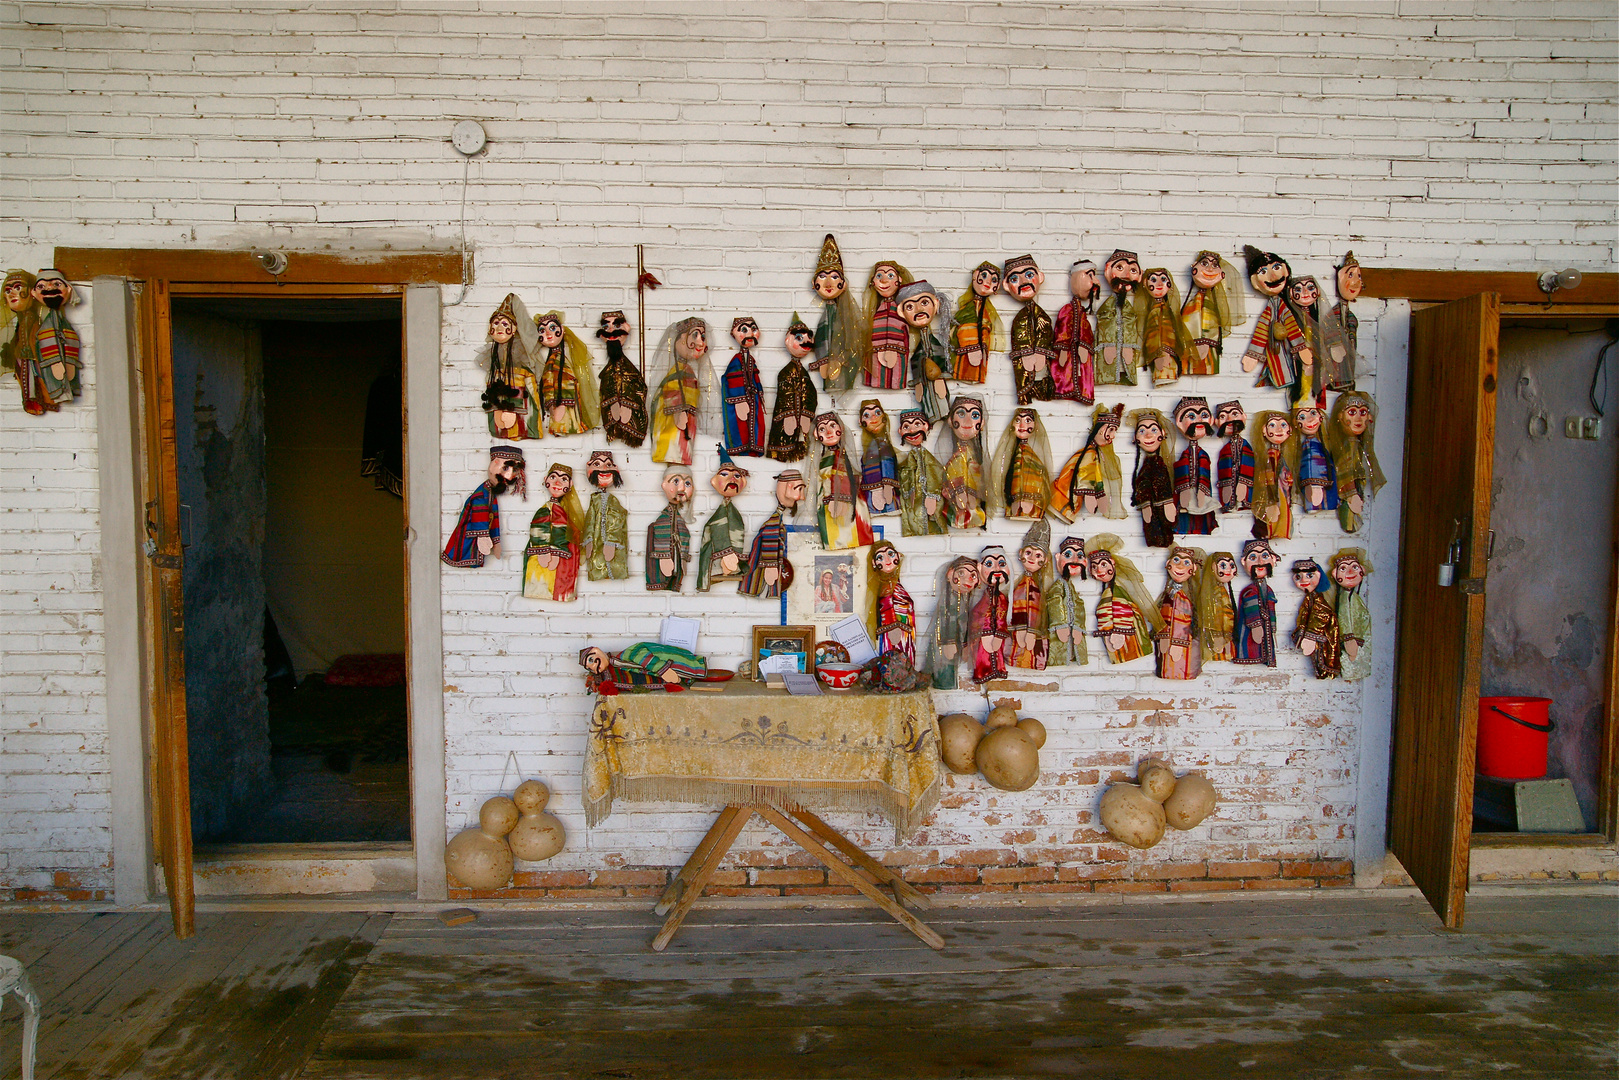 Puppets on the wall